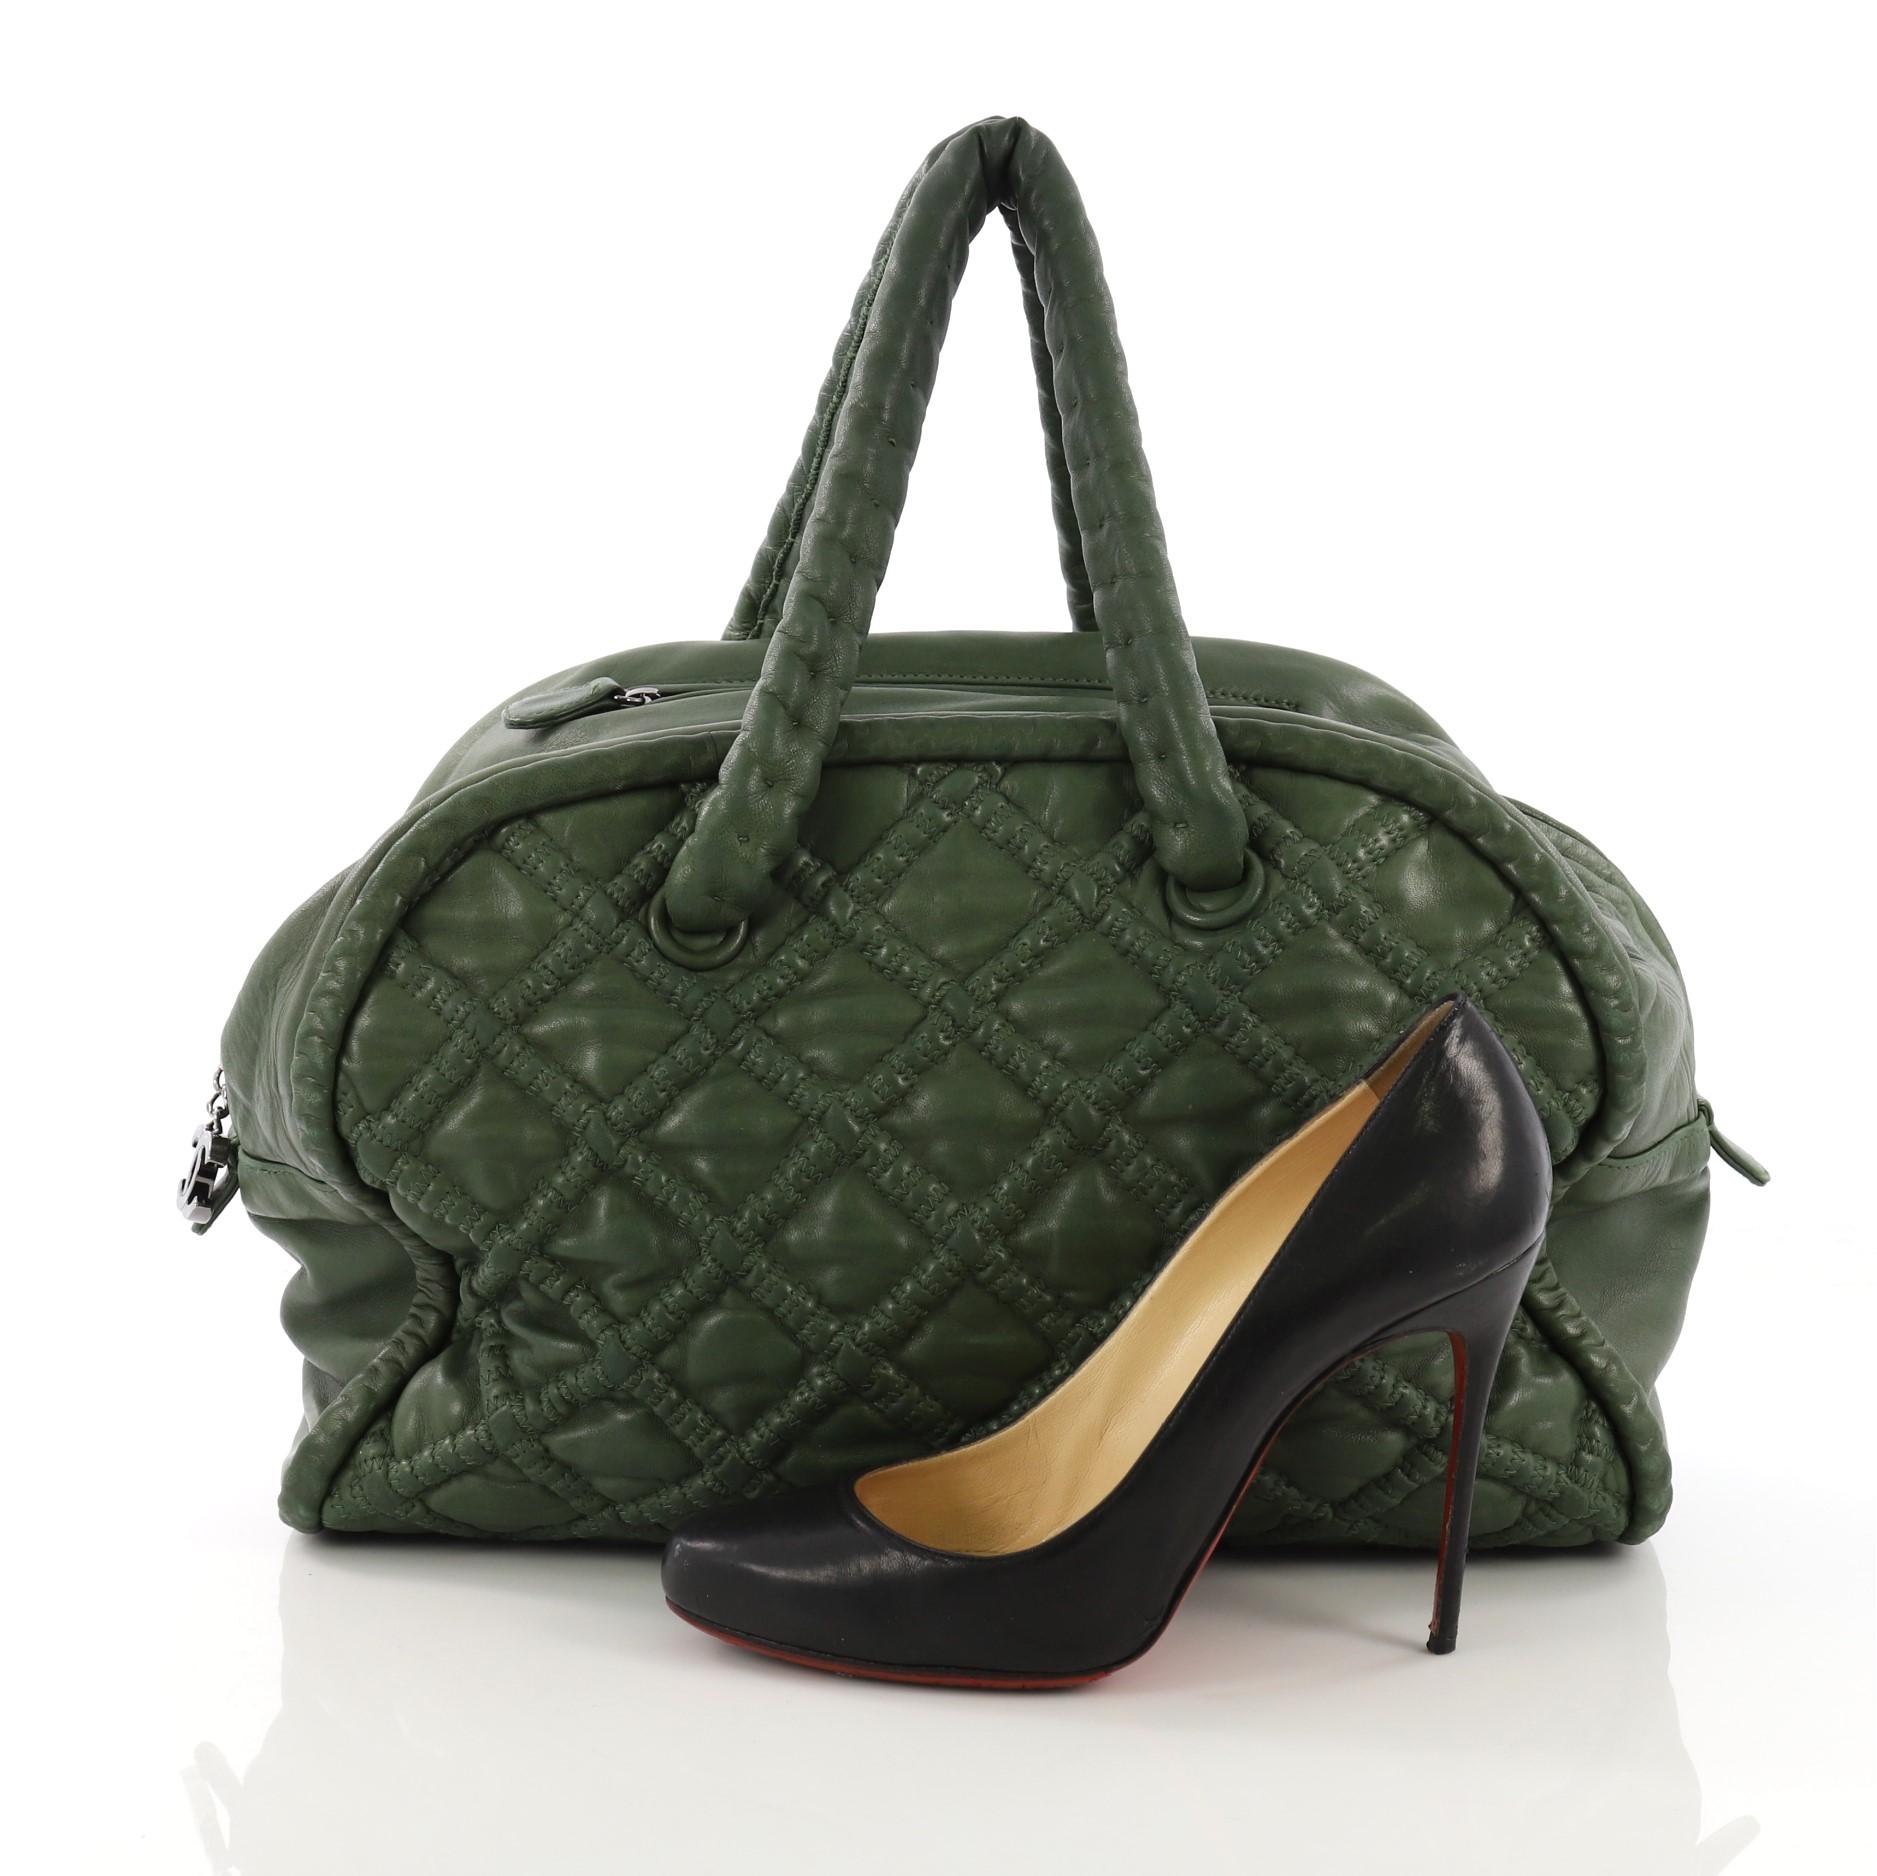 This Chanel Hidden Chain Bowler Quilted Lambskin Large, crafted from green quilted lambskin leather, features dual hidden chain leather handles, CC charm zipper pull, and silver-tone hardware. Its zip closure opens to a gray satin interior with zip